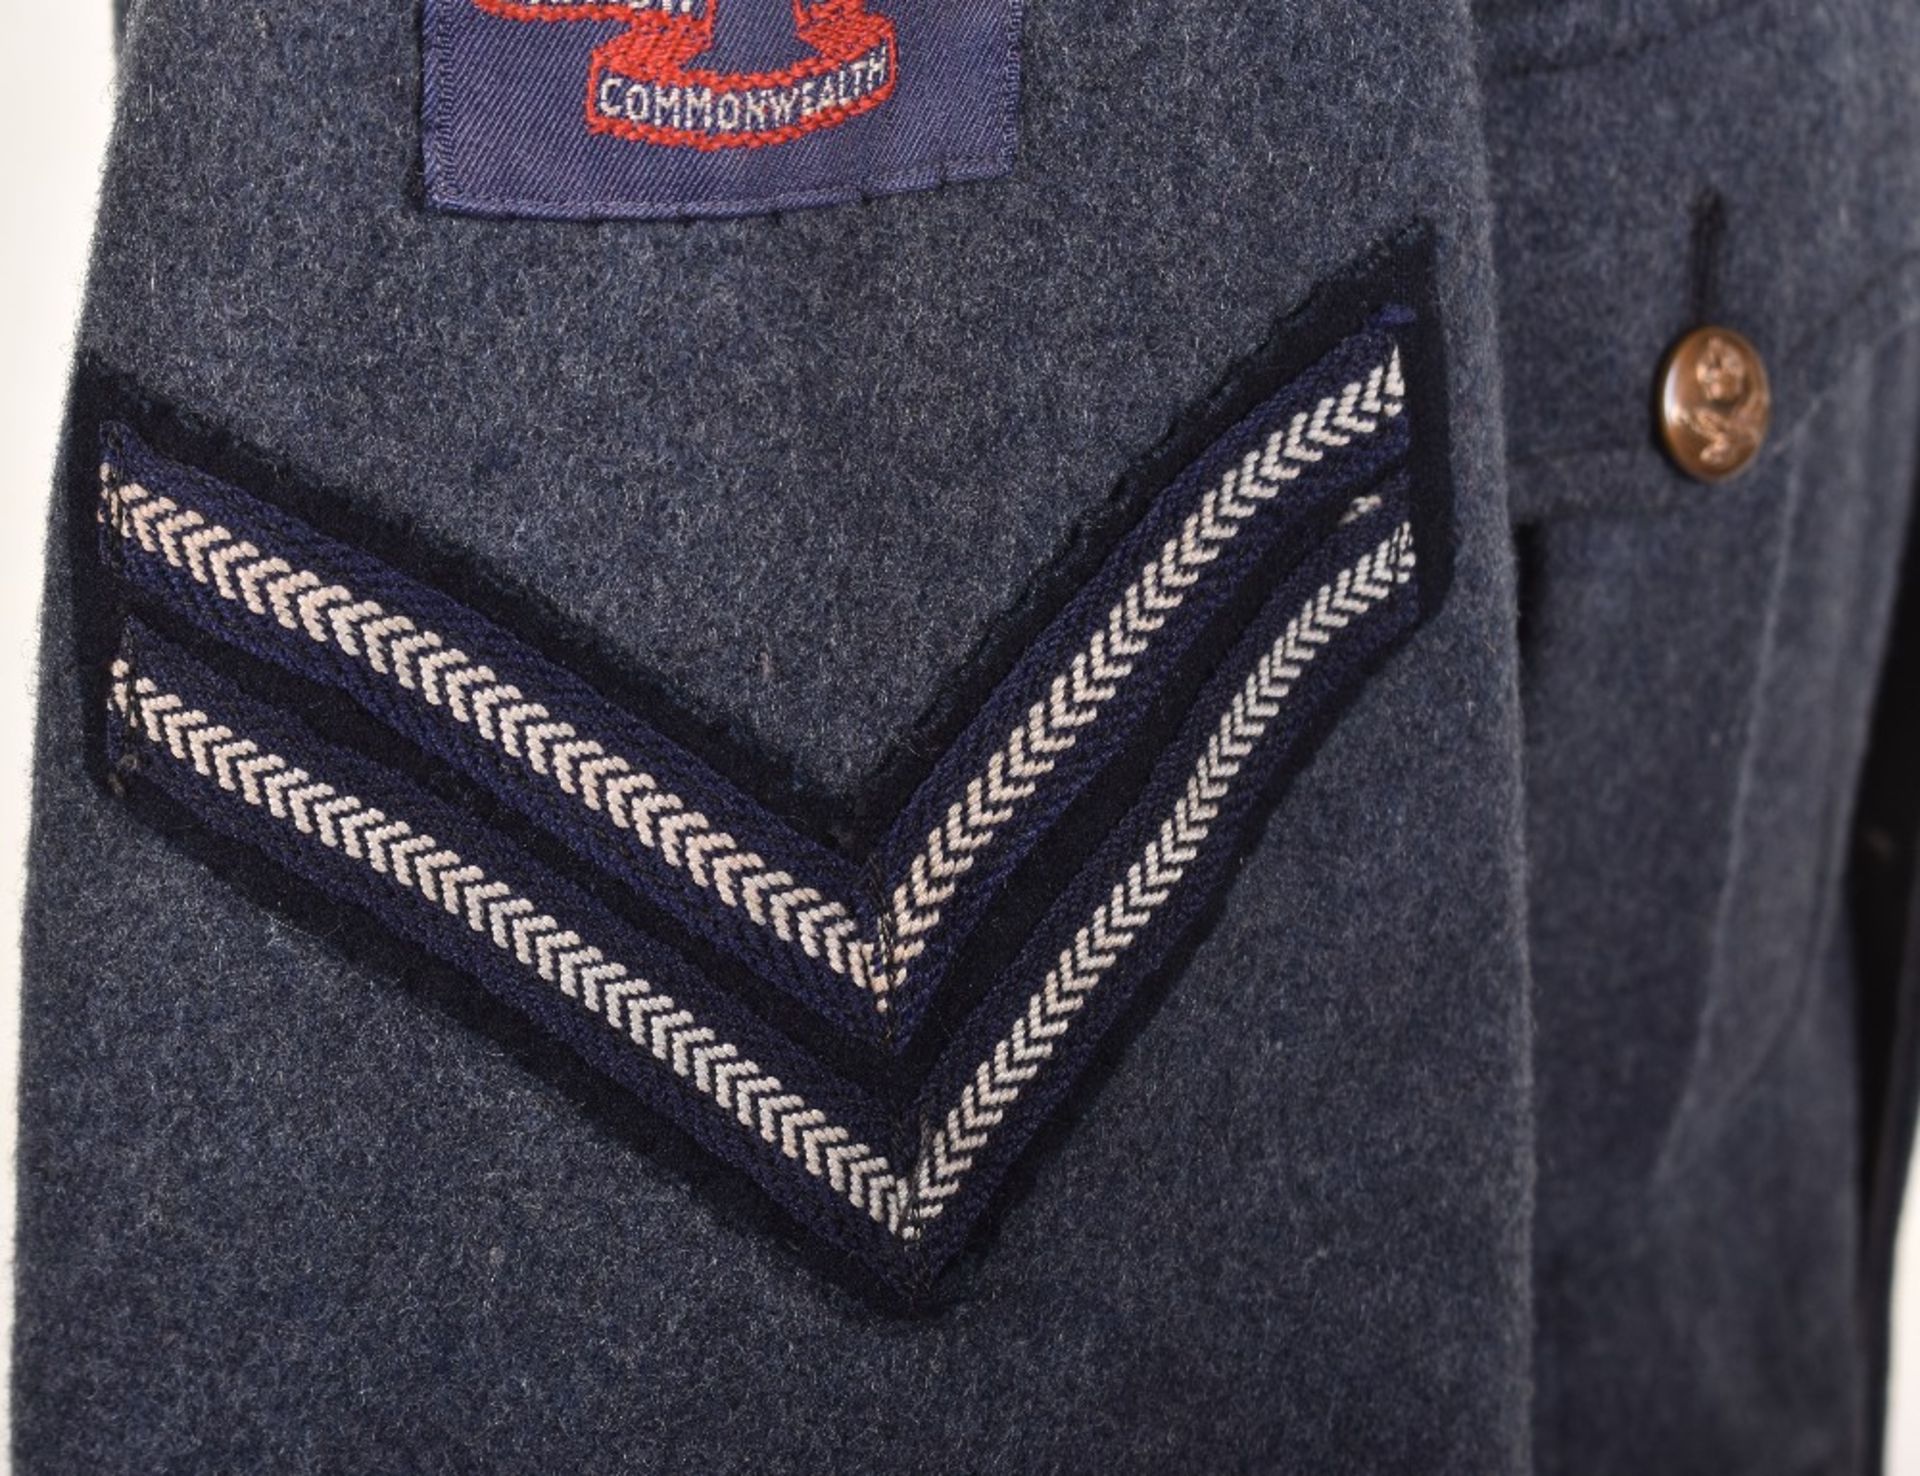 Scarce Royal Air Force Other Ranks Tunic with Insignia for British Commonwealth Occupation Force Jap - Image 3 of 10